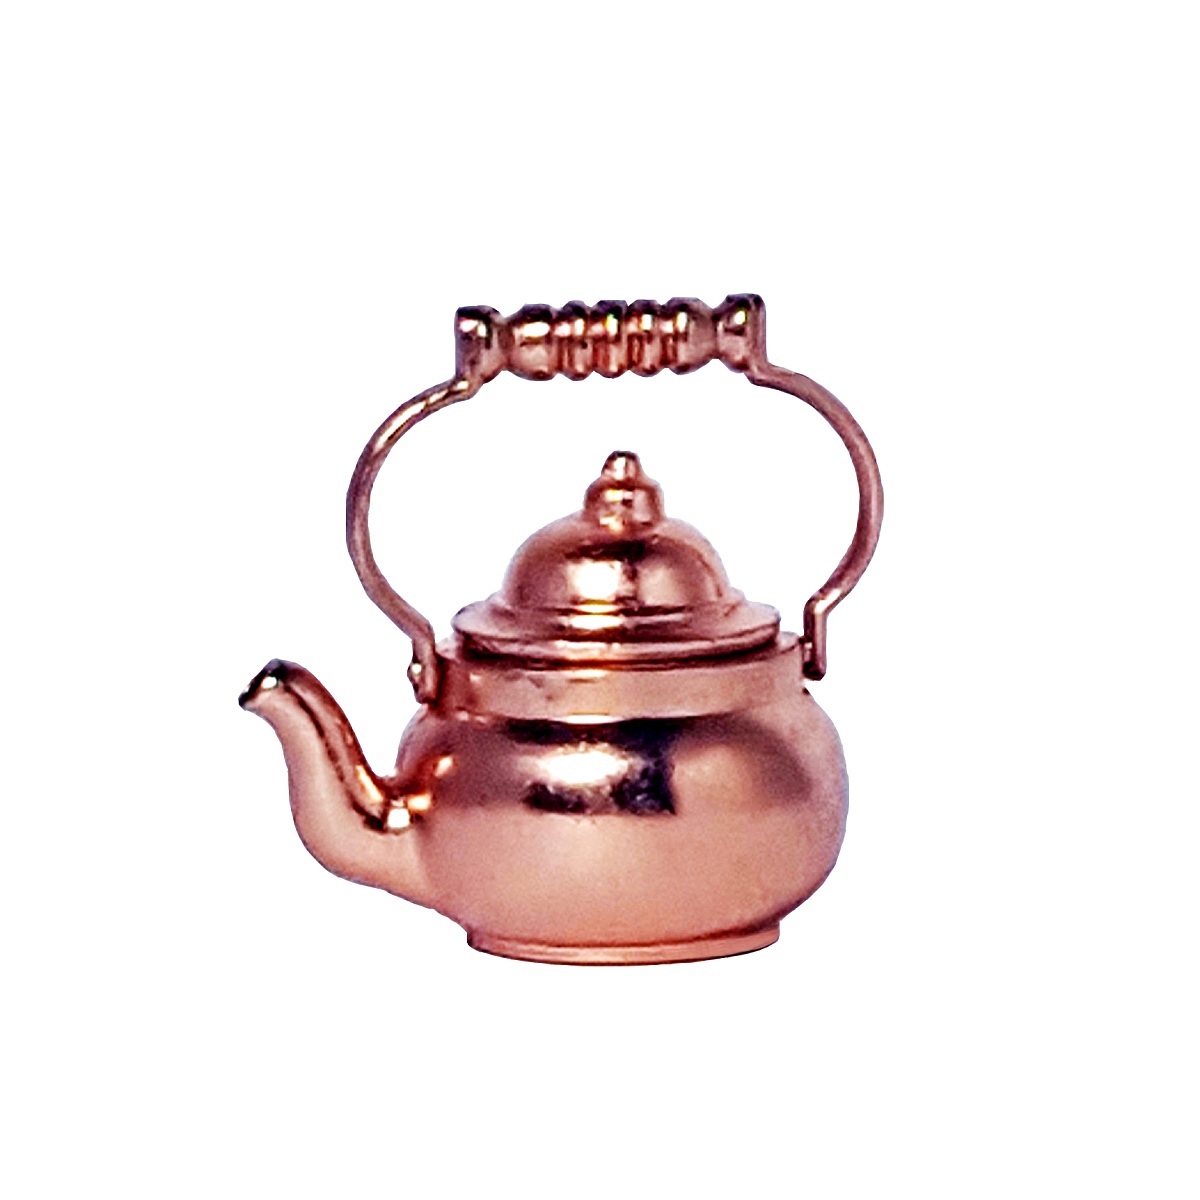 Tea kettle, copper-plated　ケトル　真鍮銅メッキ製